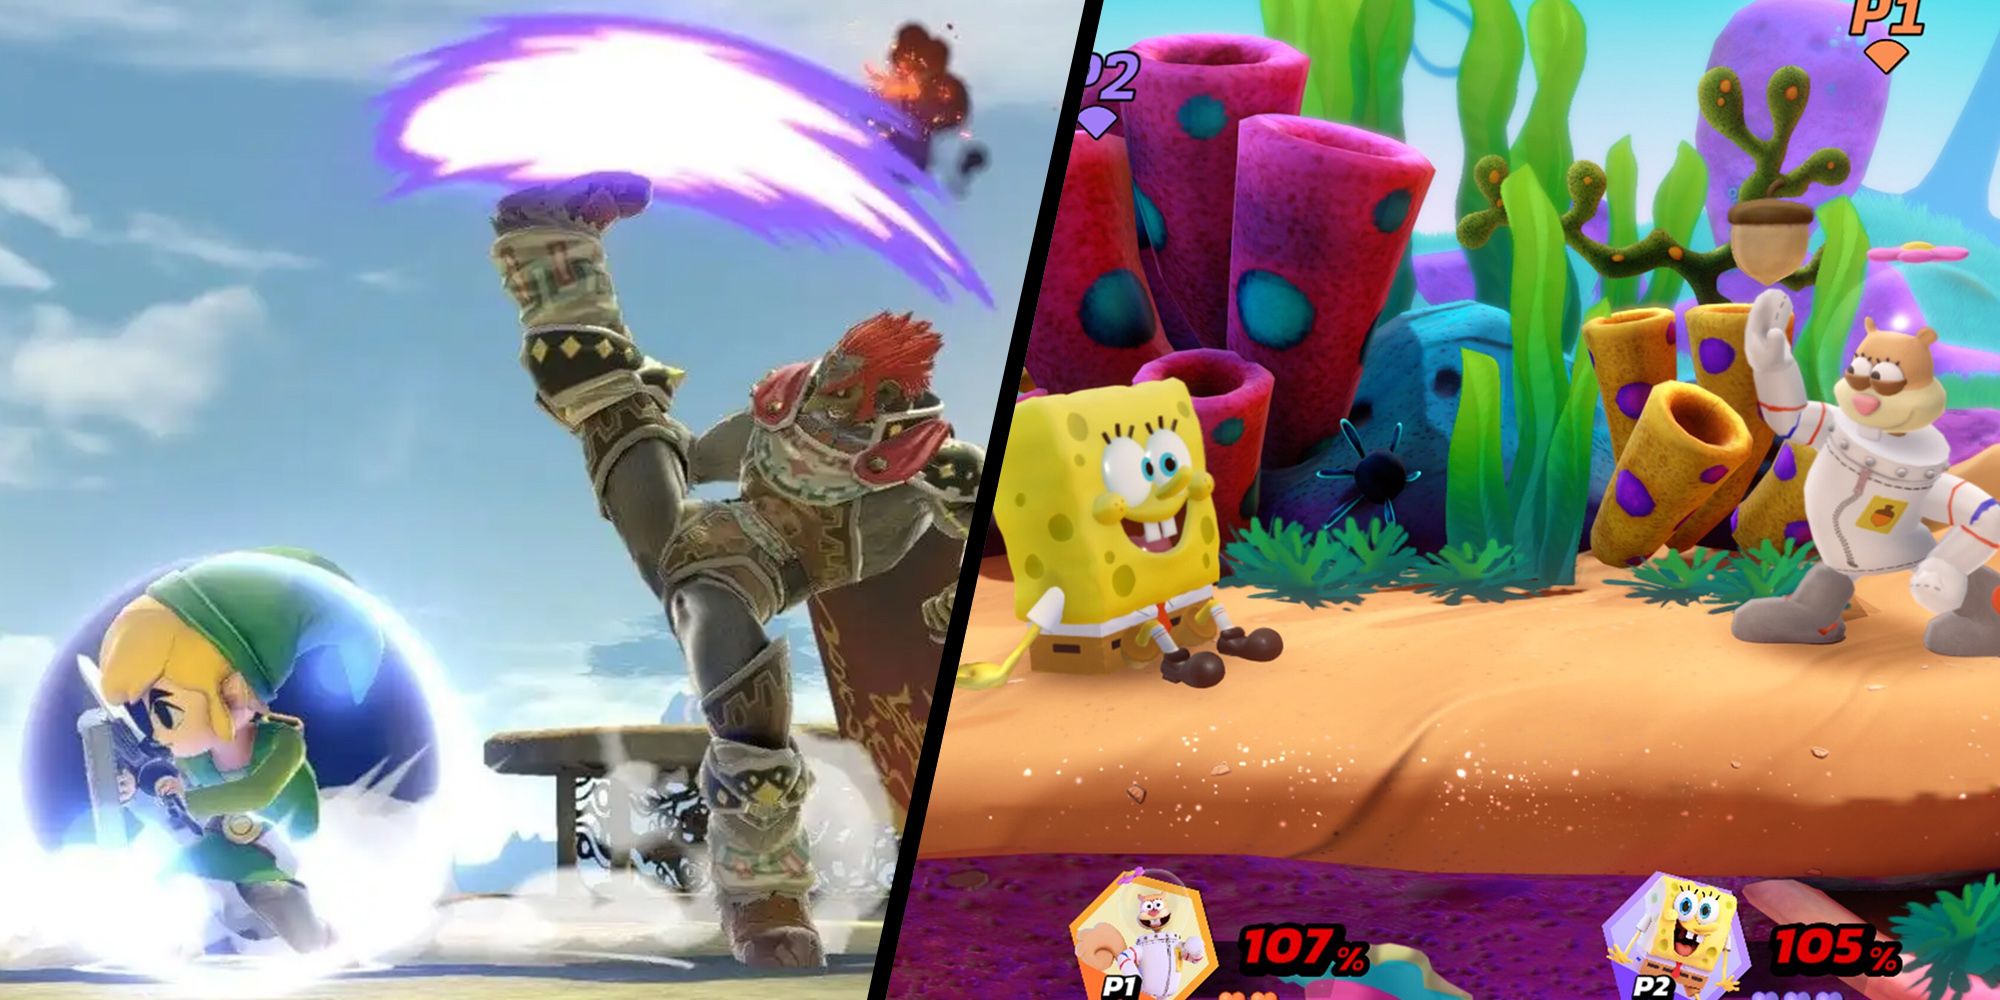 Toon Link Shielding In Smash Ultimate Compared To Sandy Cheeks Defending In All-Star Brawl